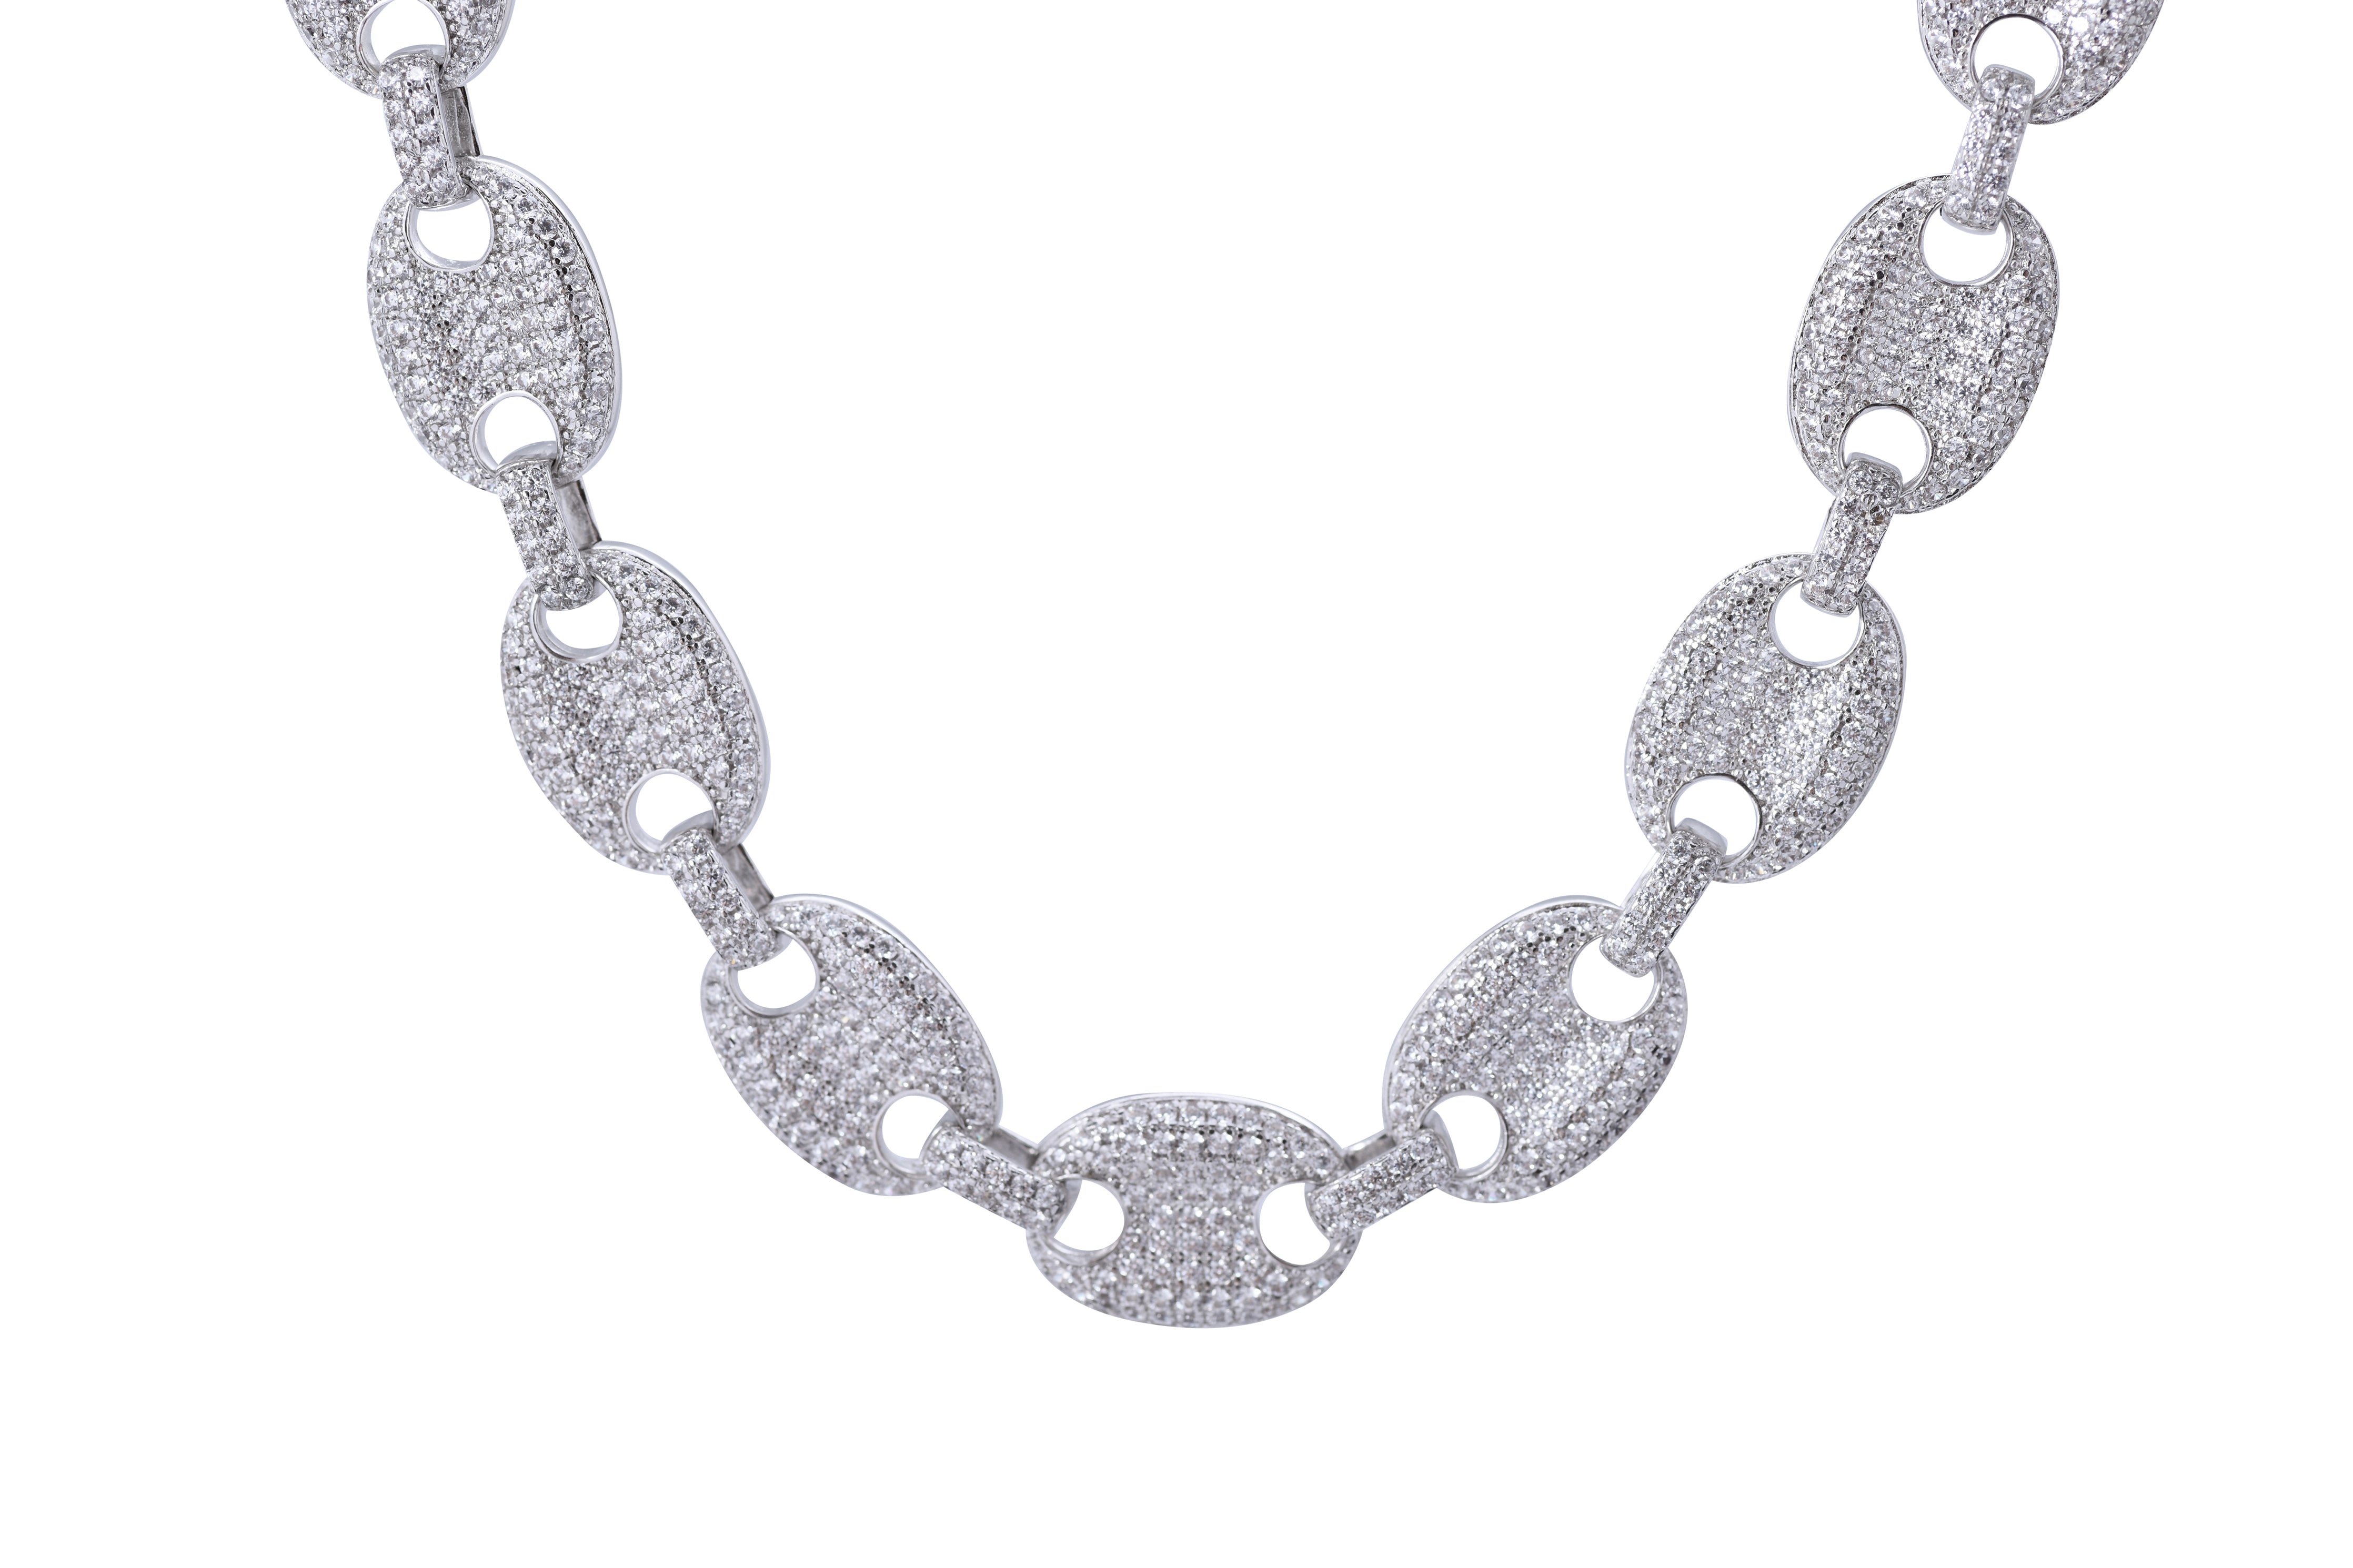 Women's Mariner Puff CZ Chain Choker Necklace White Gold Plated